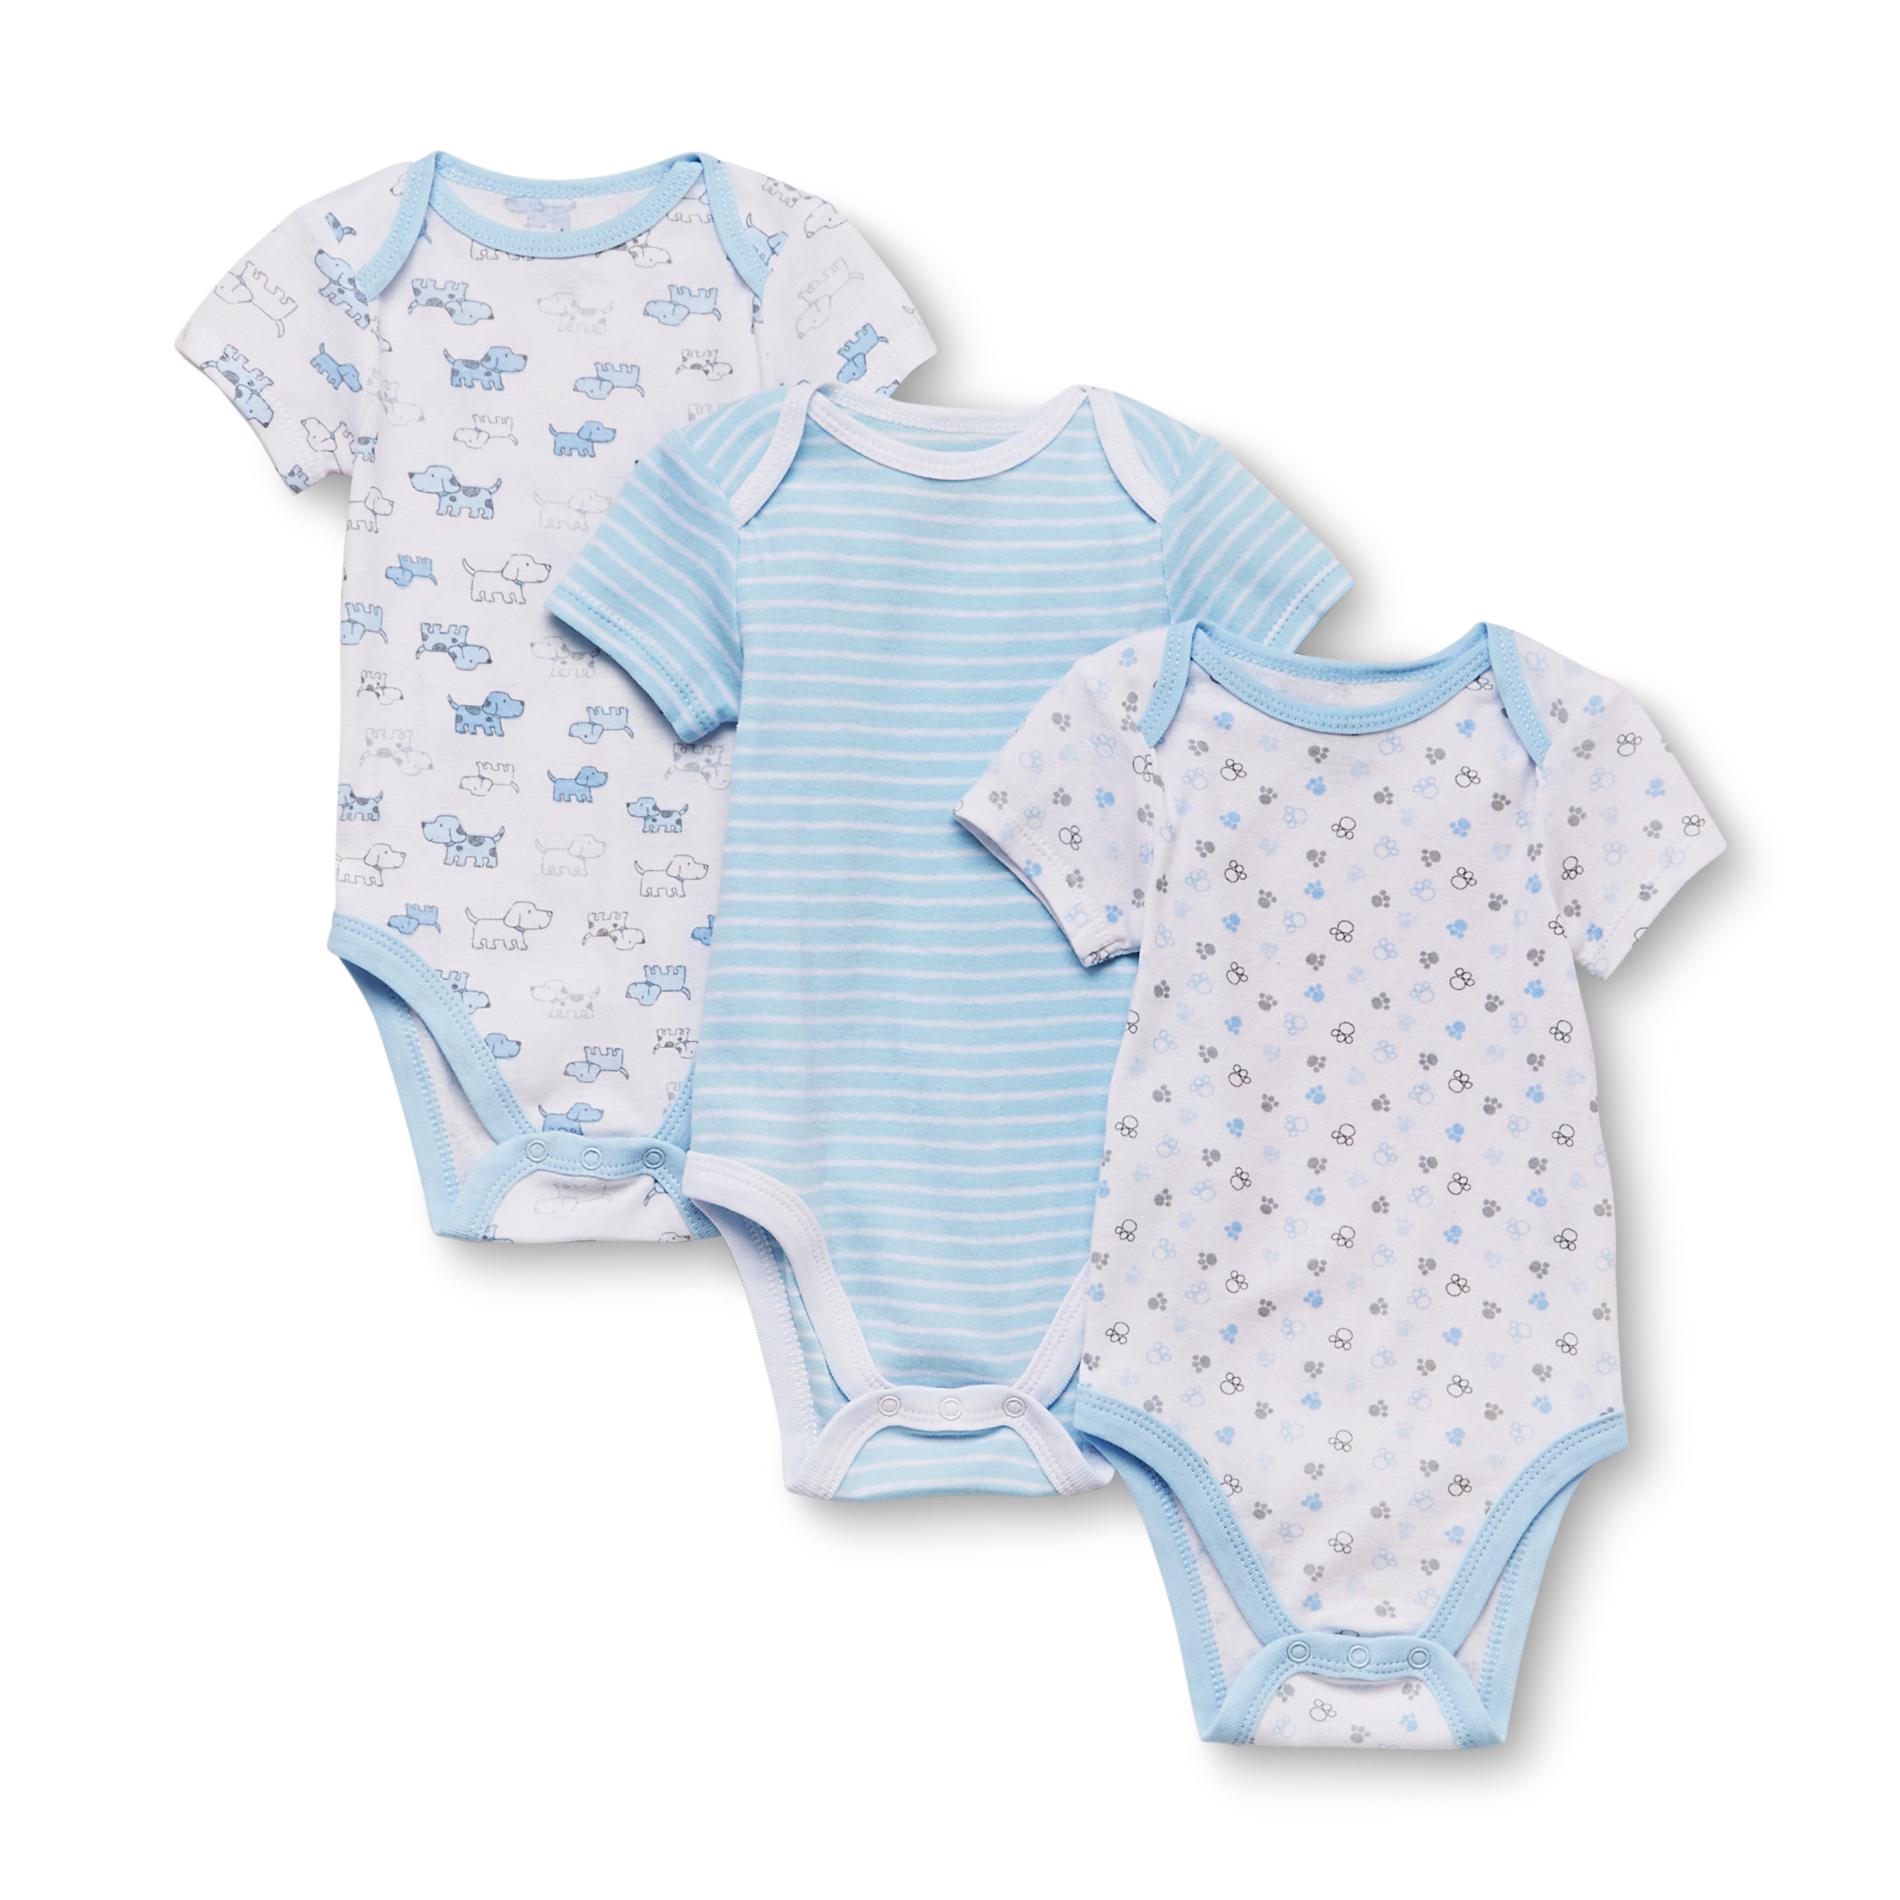 Welcome to the World Newborn Boy's 3 Pack Bodysuits - Dogs